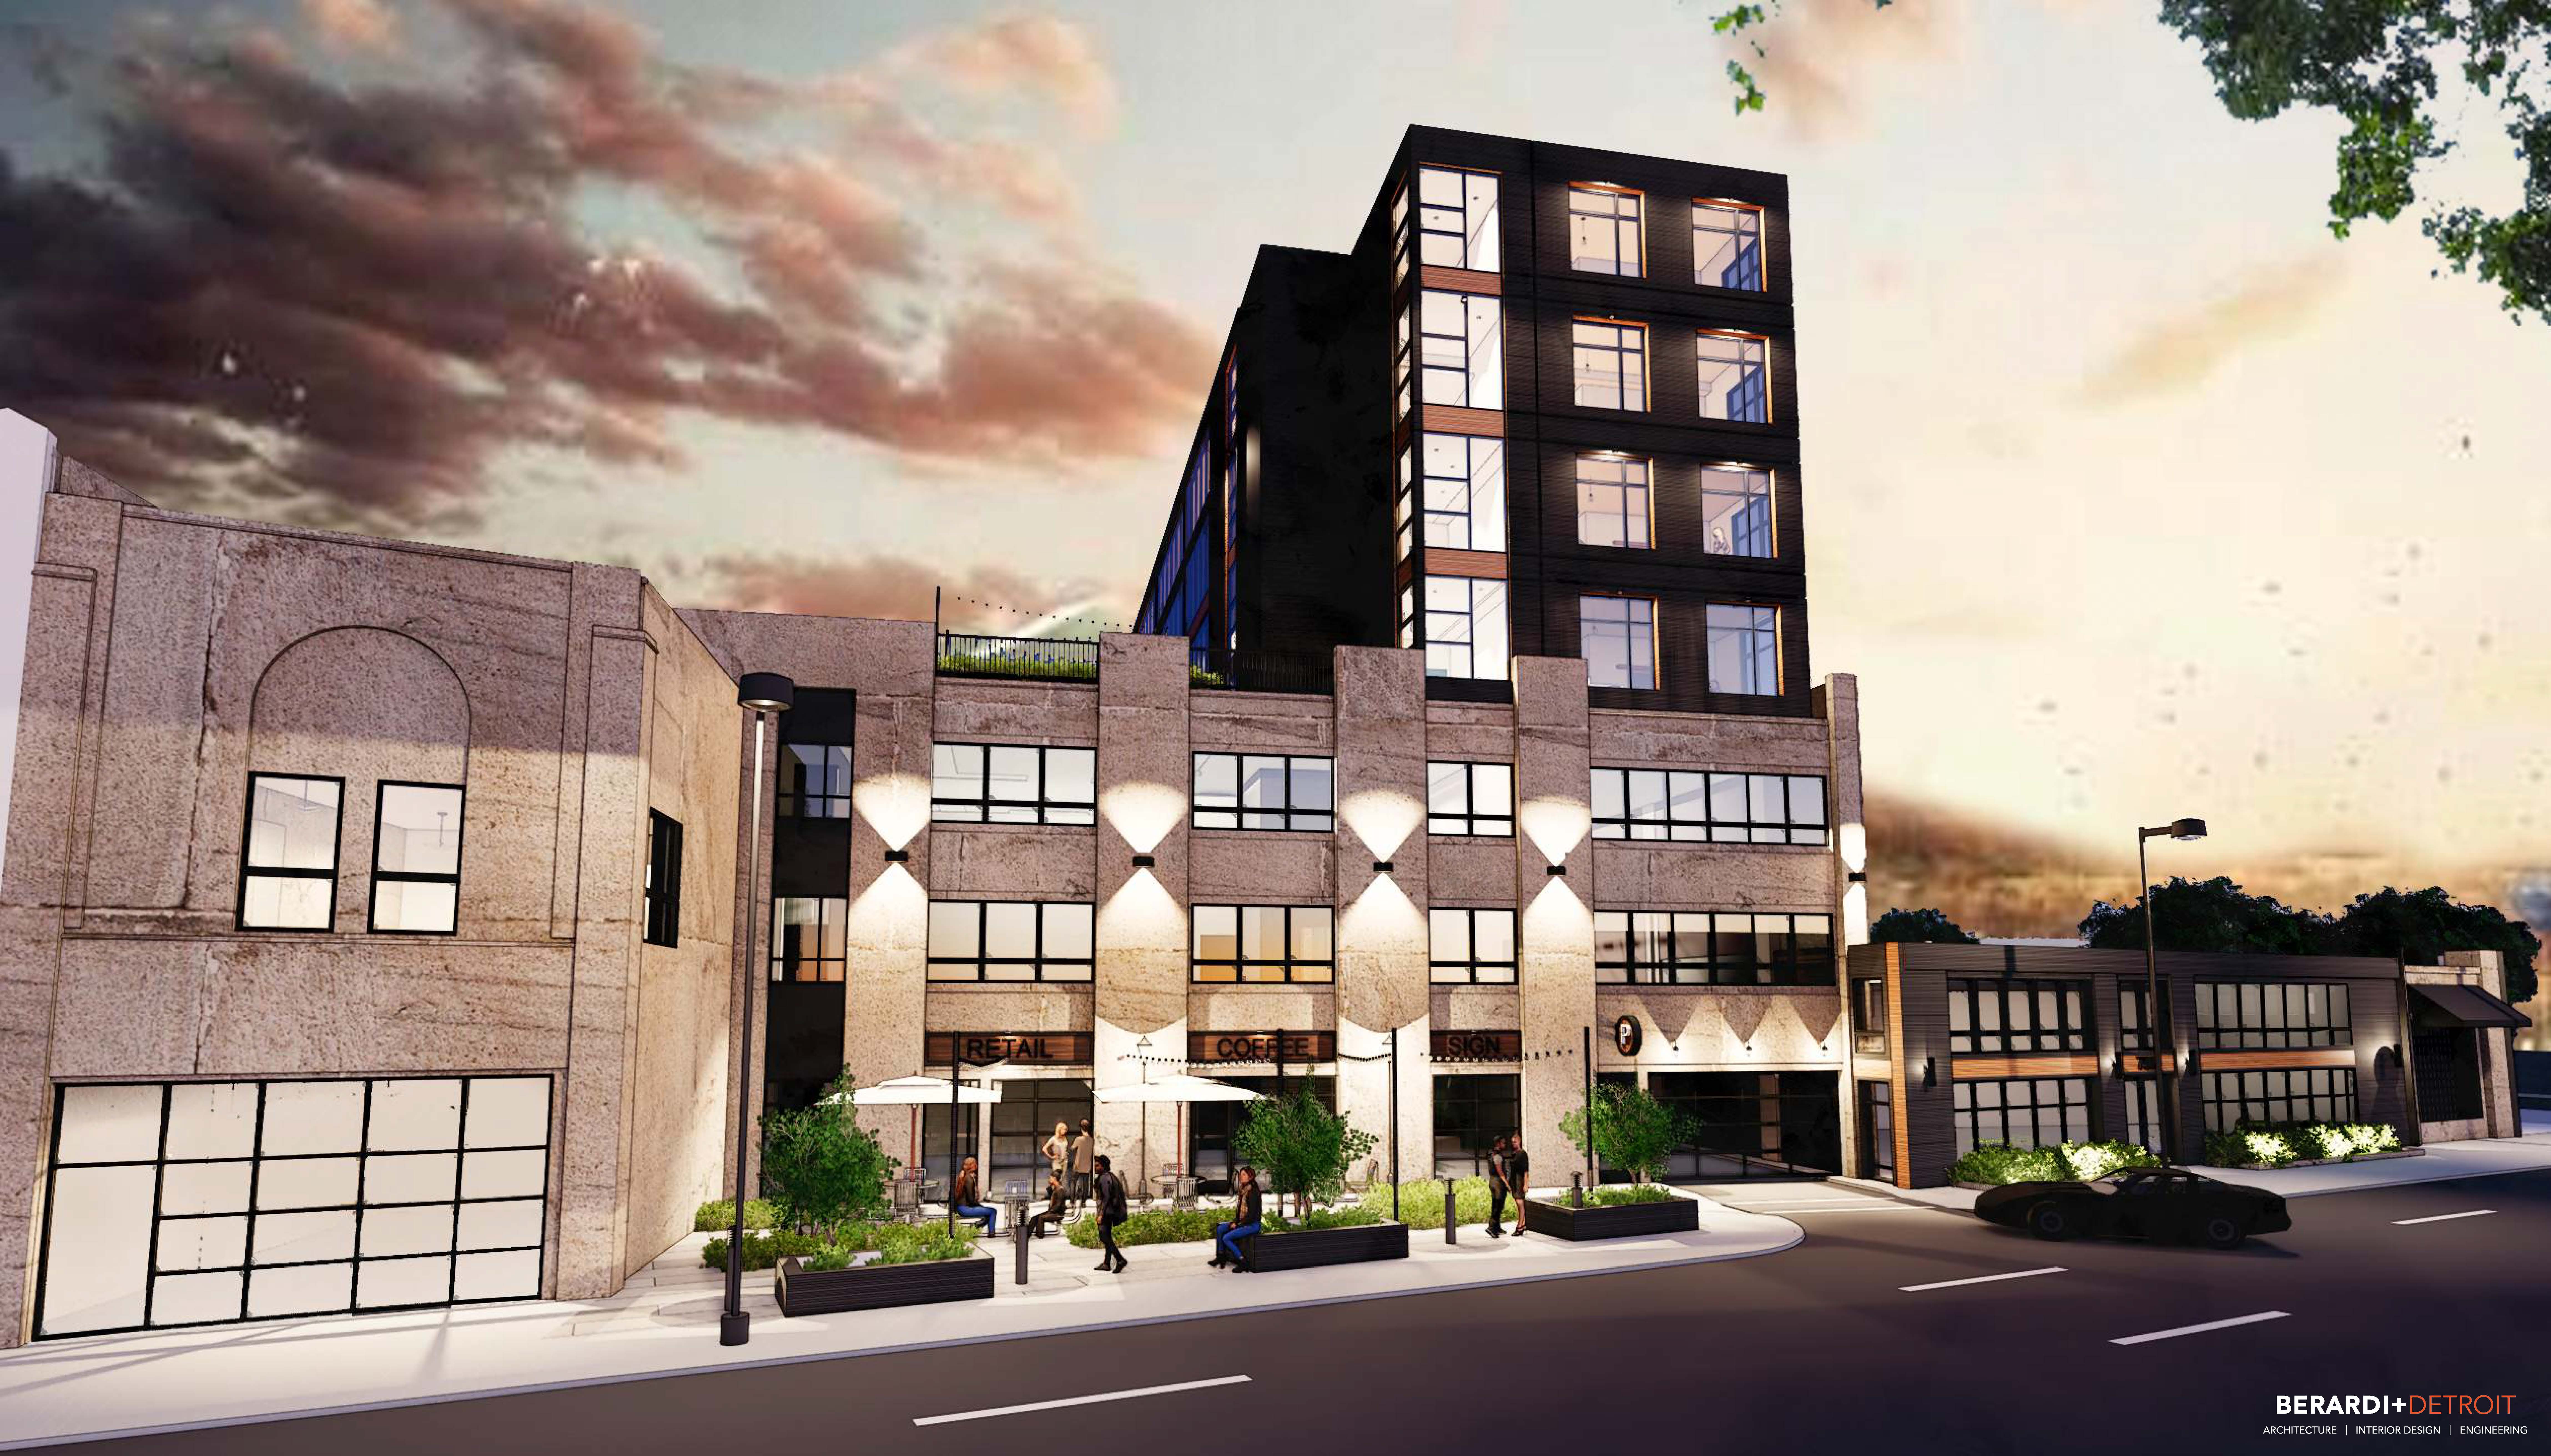 $21 million development with apartments, parking garage, retail planned on polluted site on Jefferson